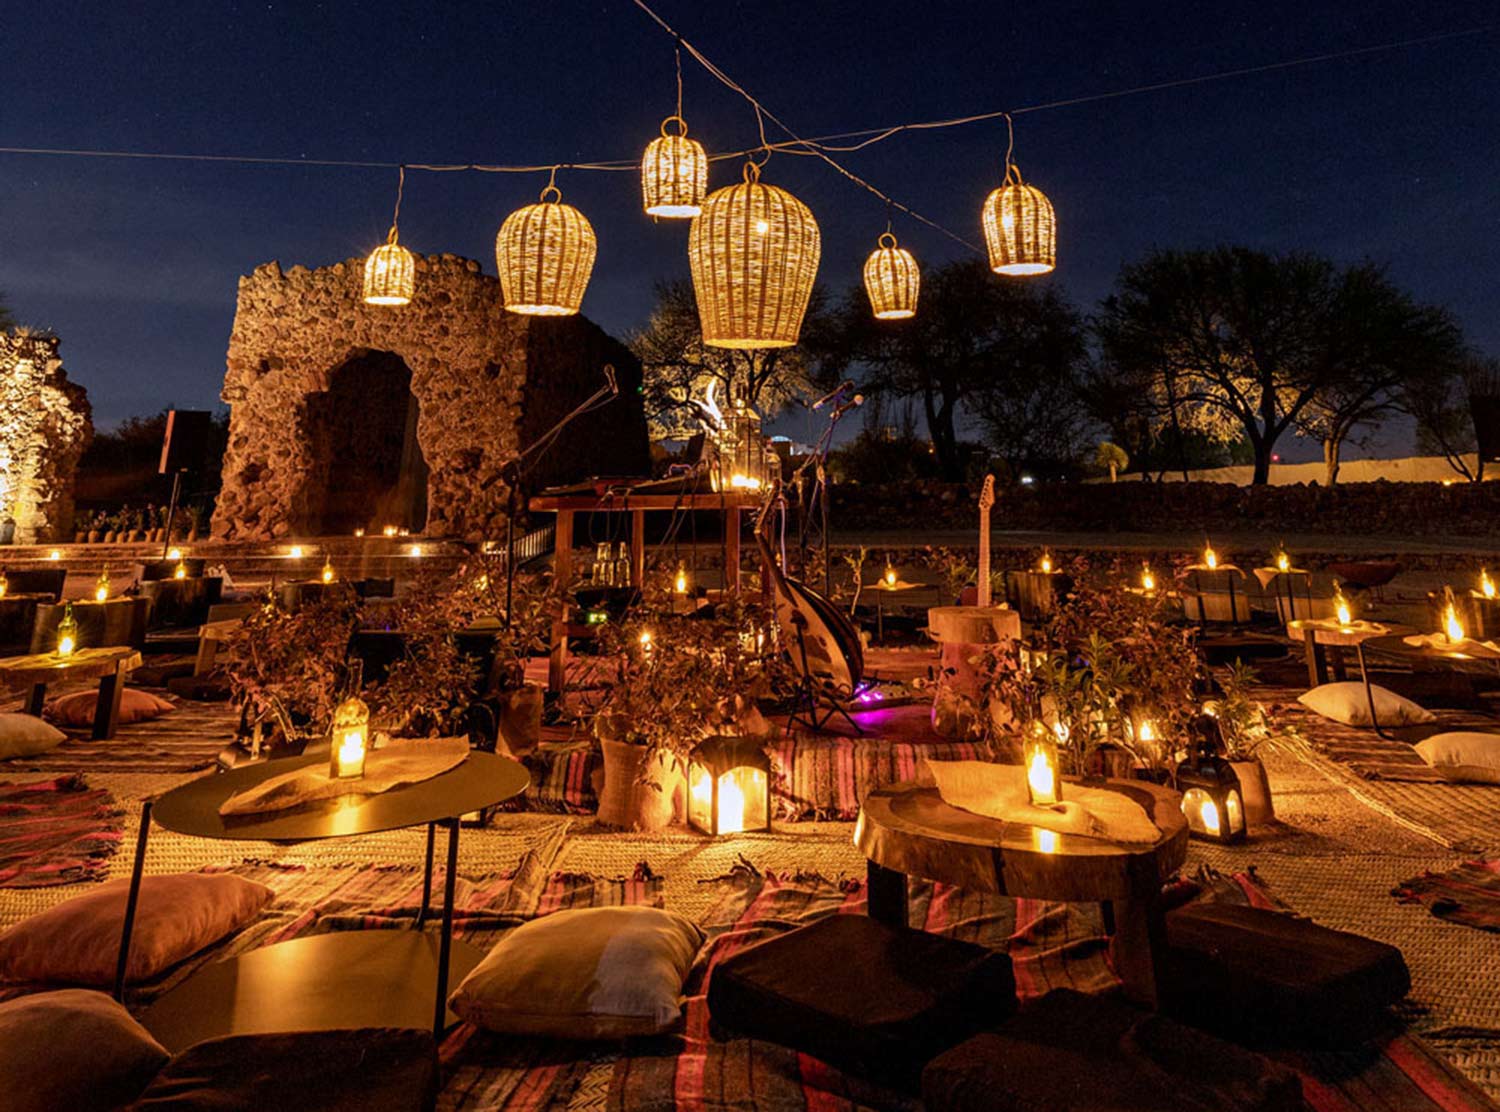 The Newest Habitas Lands in San Miguel de Allende Intimate dinners under candle-light